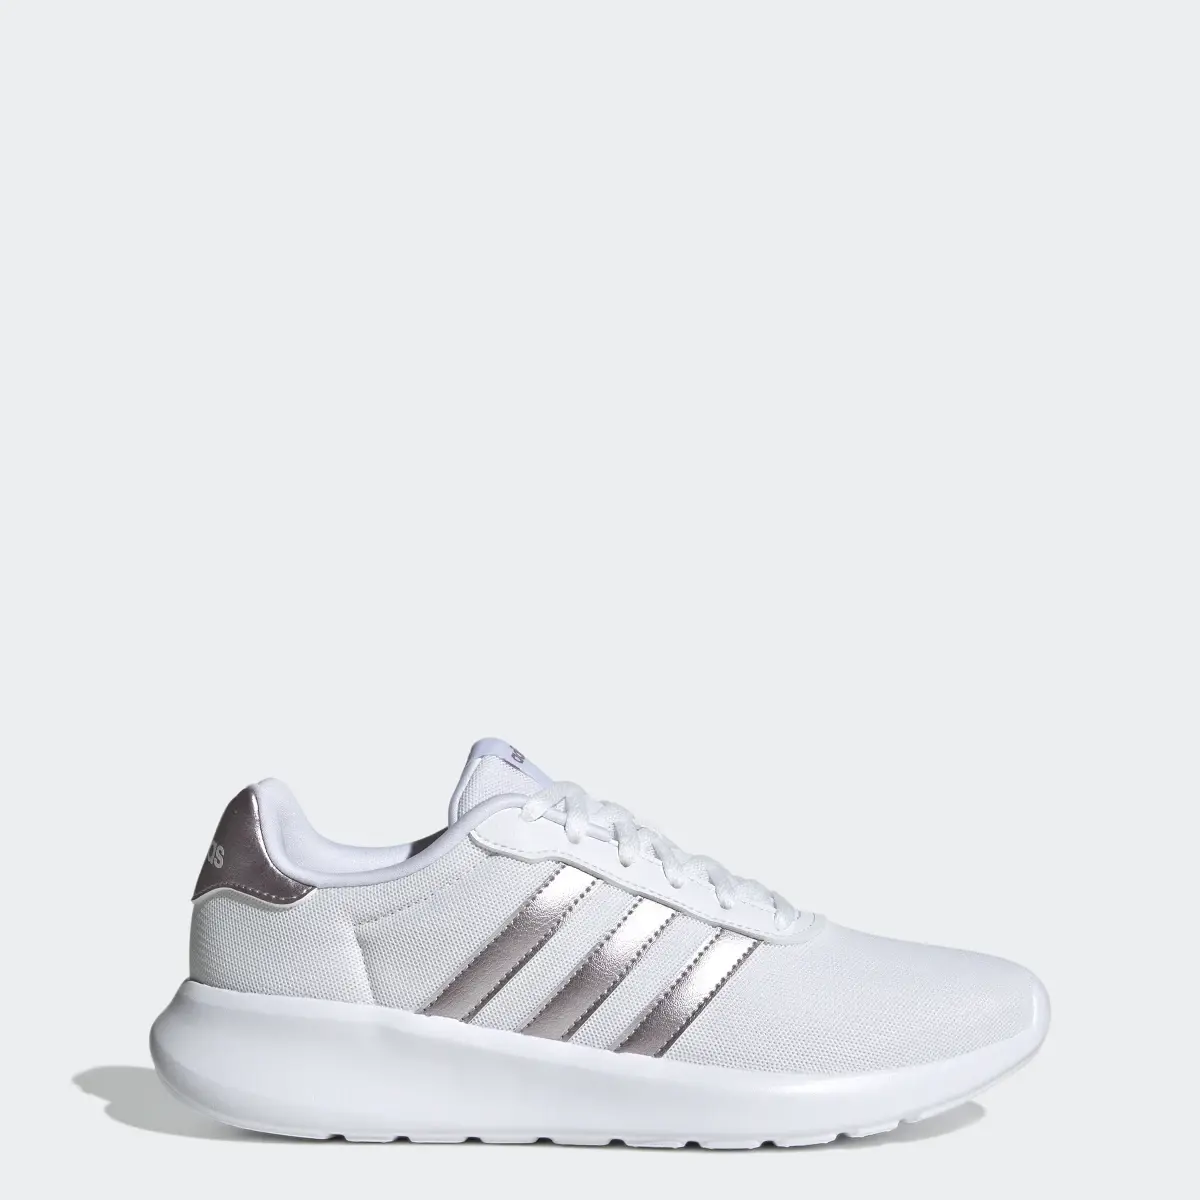 Adidas Lite Racer 3.0 Shoes. 1